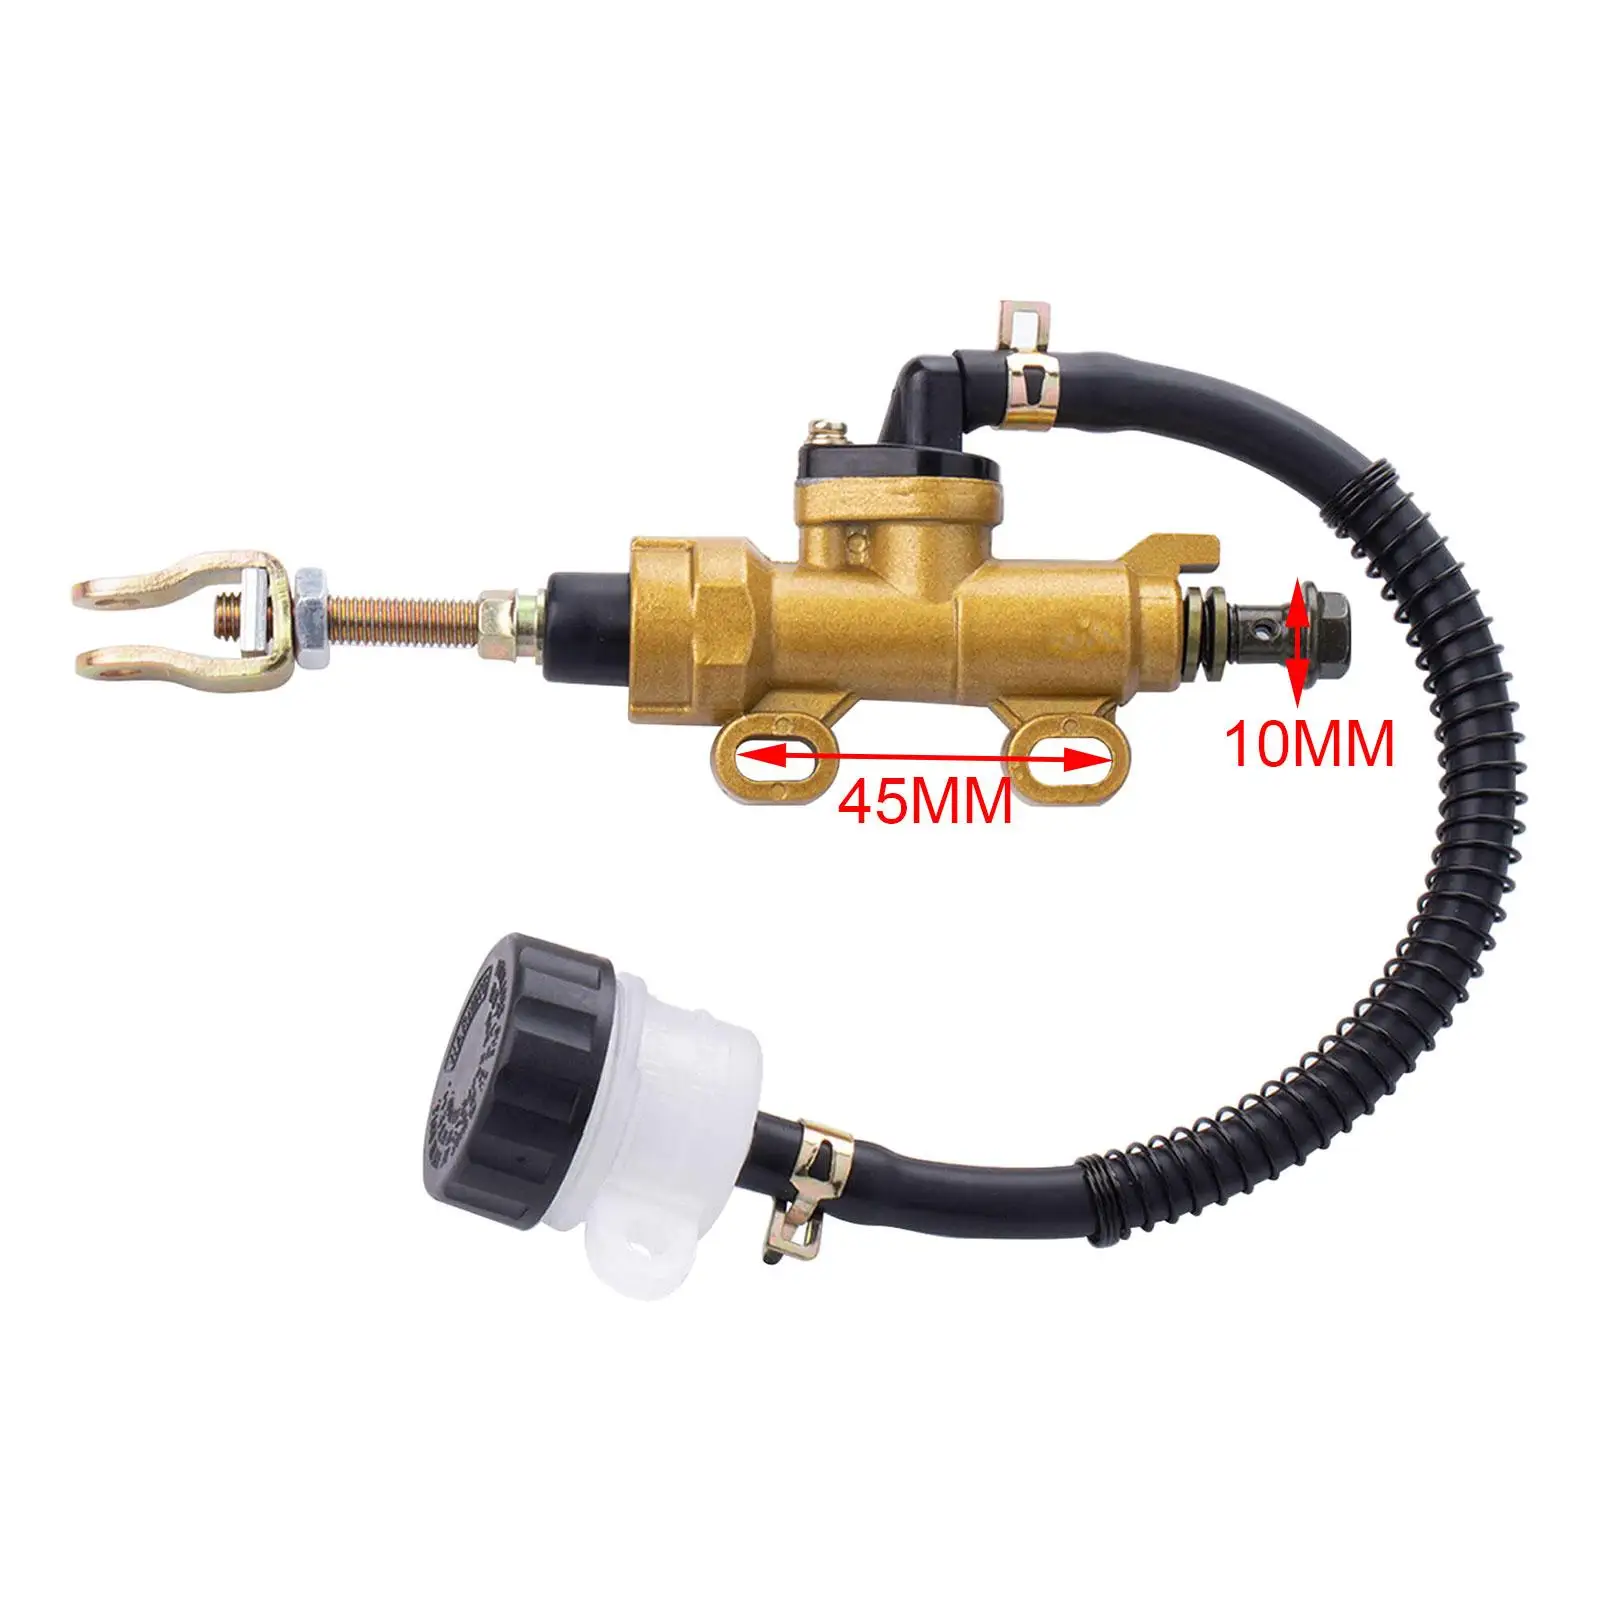 Motorcycle Rear Foot Master Cylinder Brake Pump for Honda CB400 600 900 Stable Performance Easy Installation